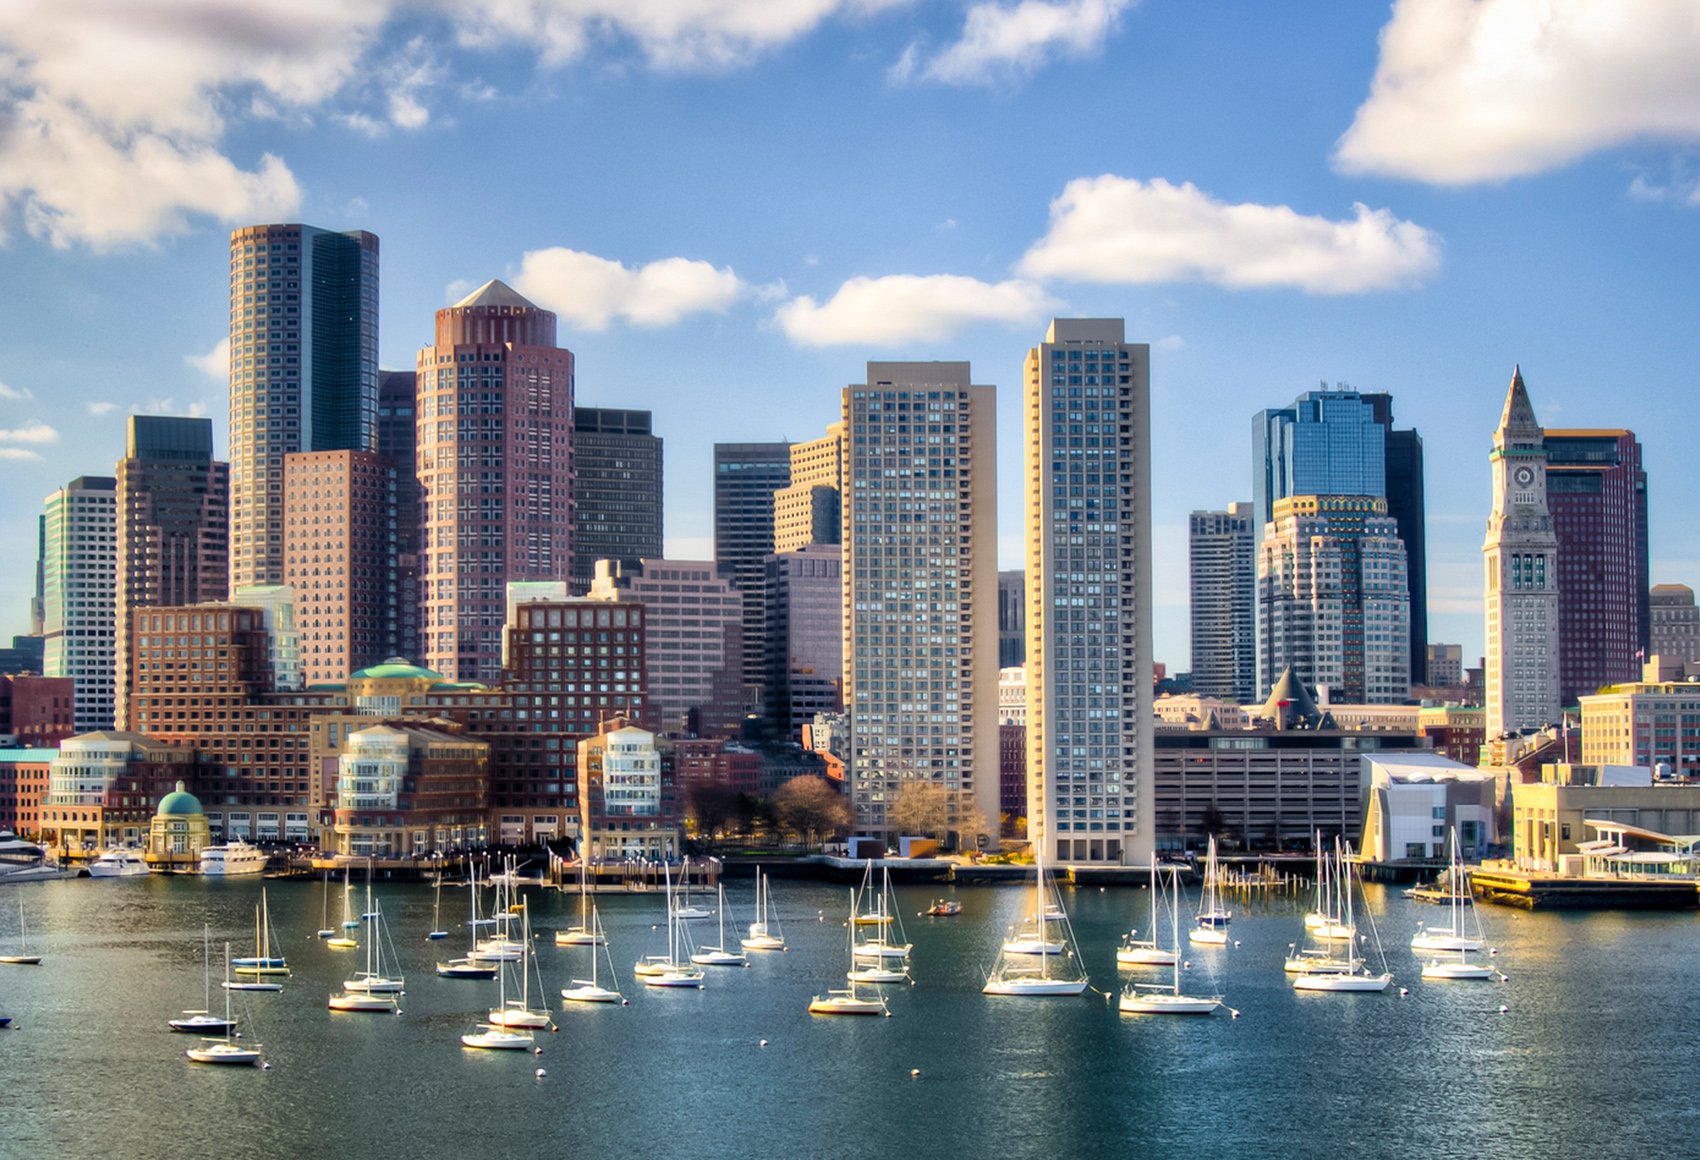 Daytime shot of the Boston downtown skyline and view of the Boston harbor